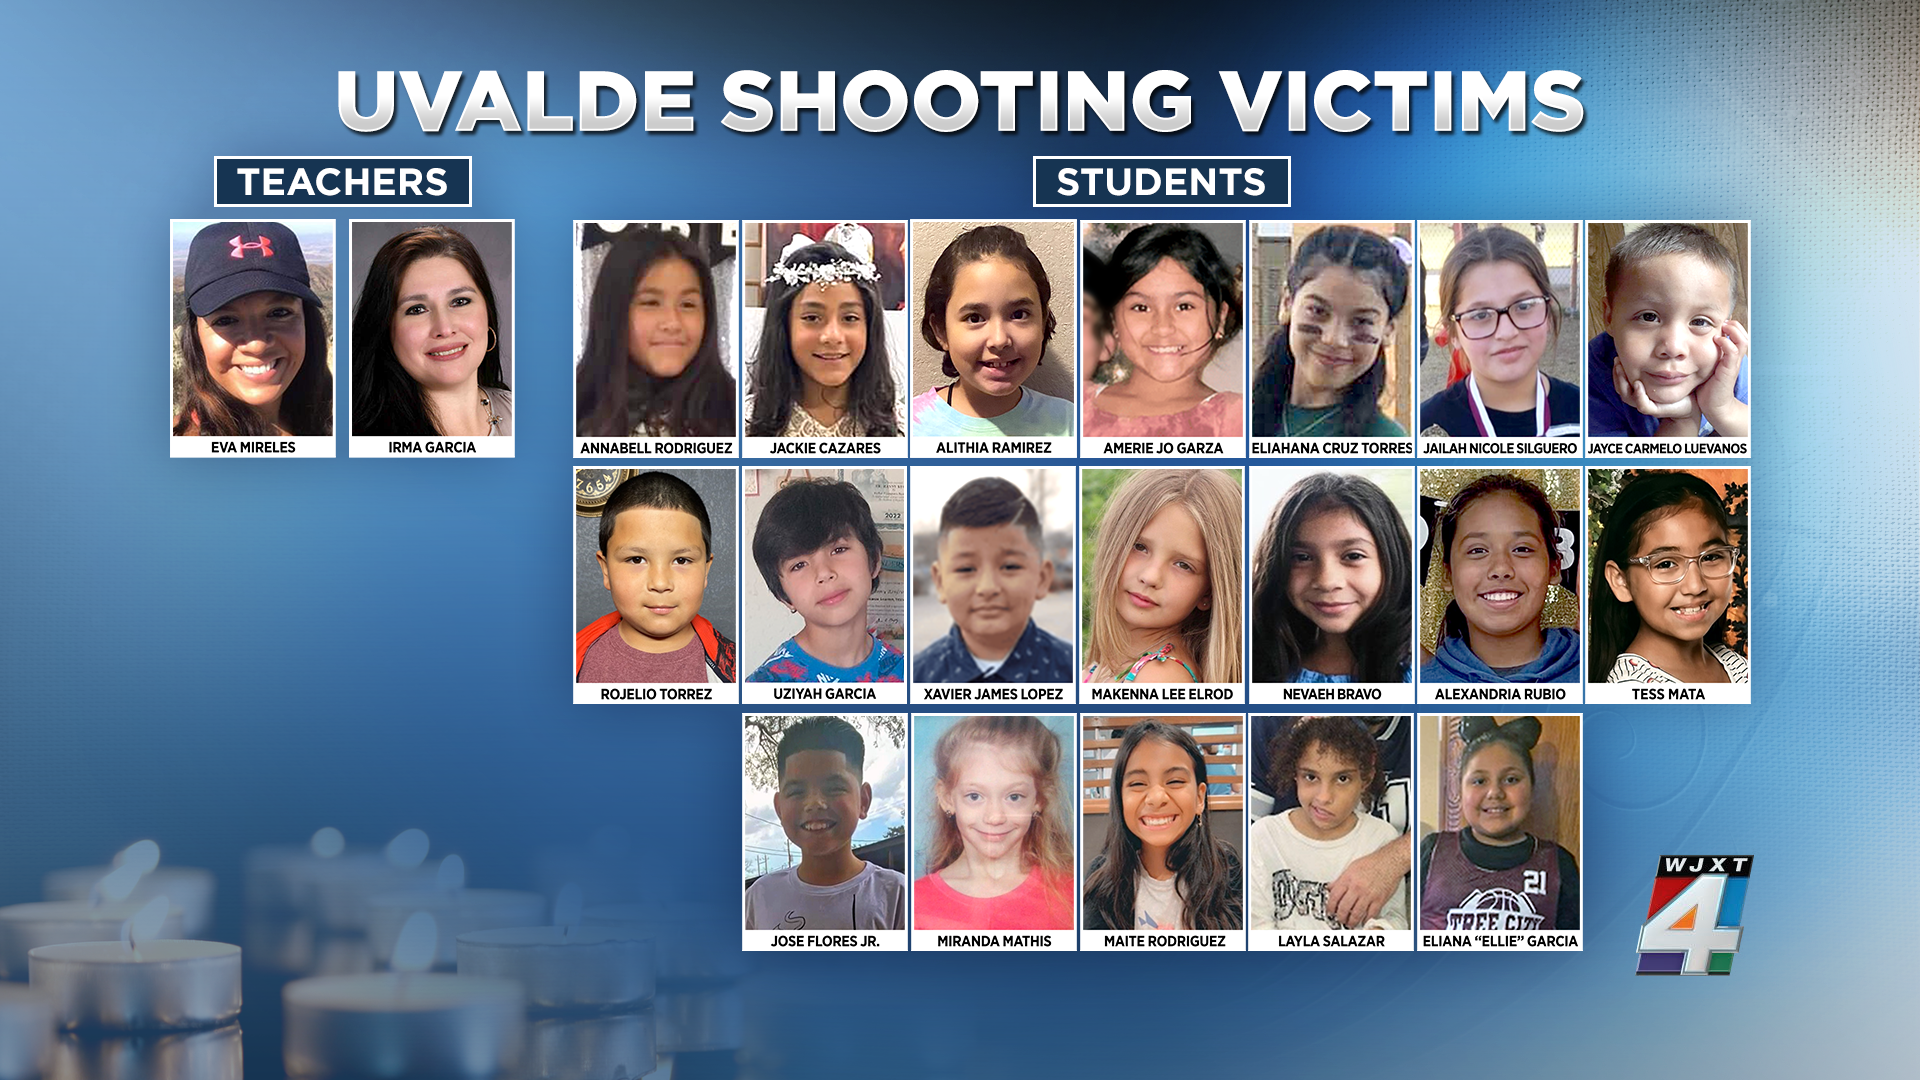 Remembering the 21 victims of the Uvalde elementary school shooting